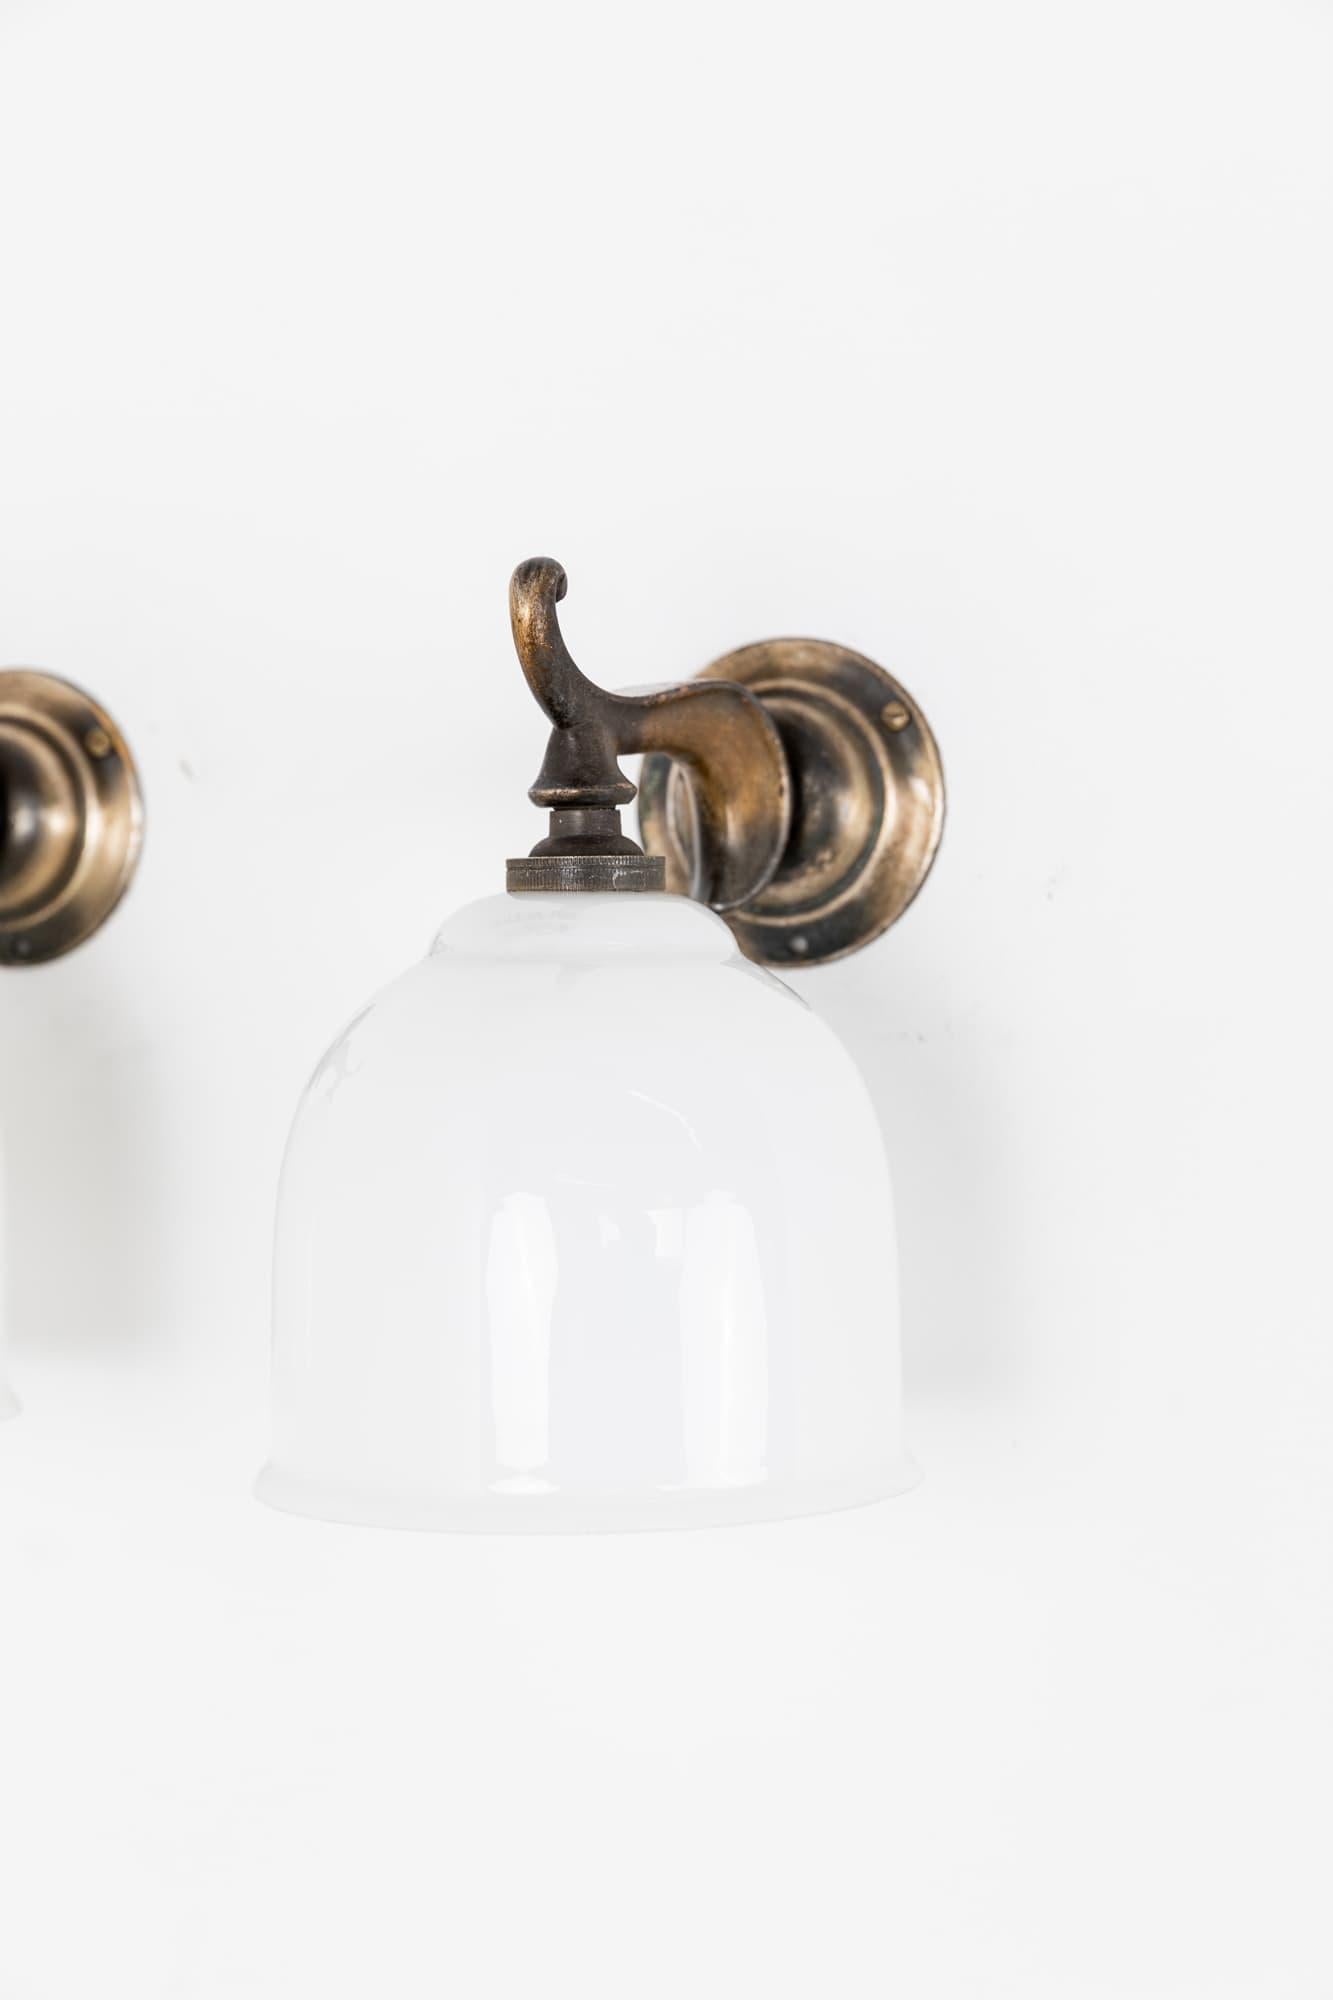 An incredibly elegant pair of wall mounted lamps made in England by GEC. c.1920

The simply formed diminutive silver-plated brass mounts with opaline glass shades. Priced as a pair.
